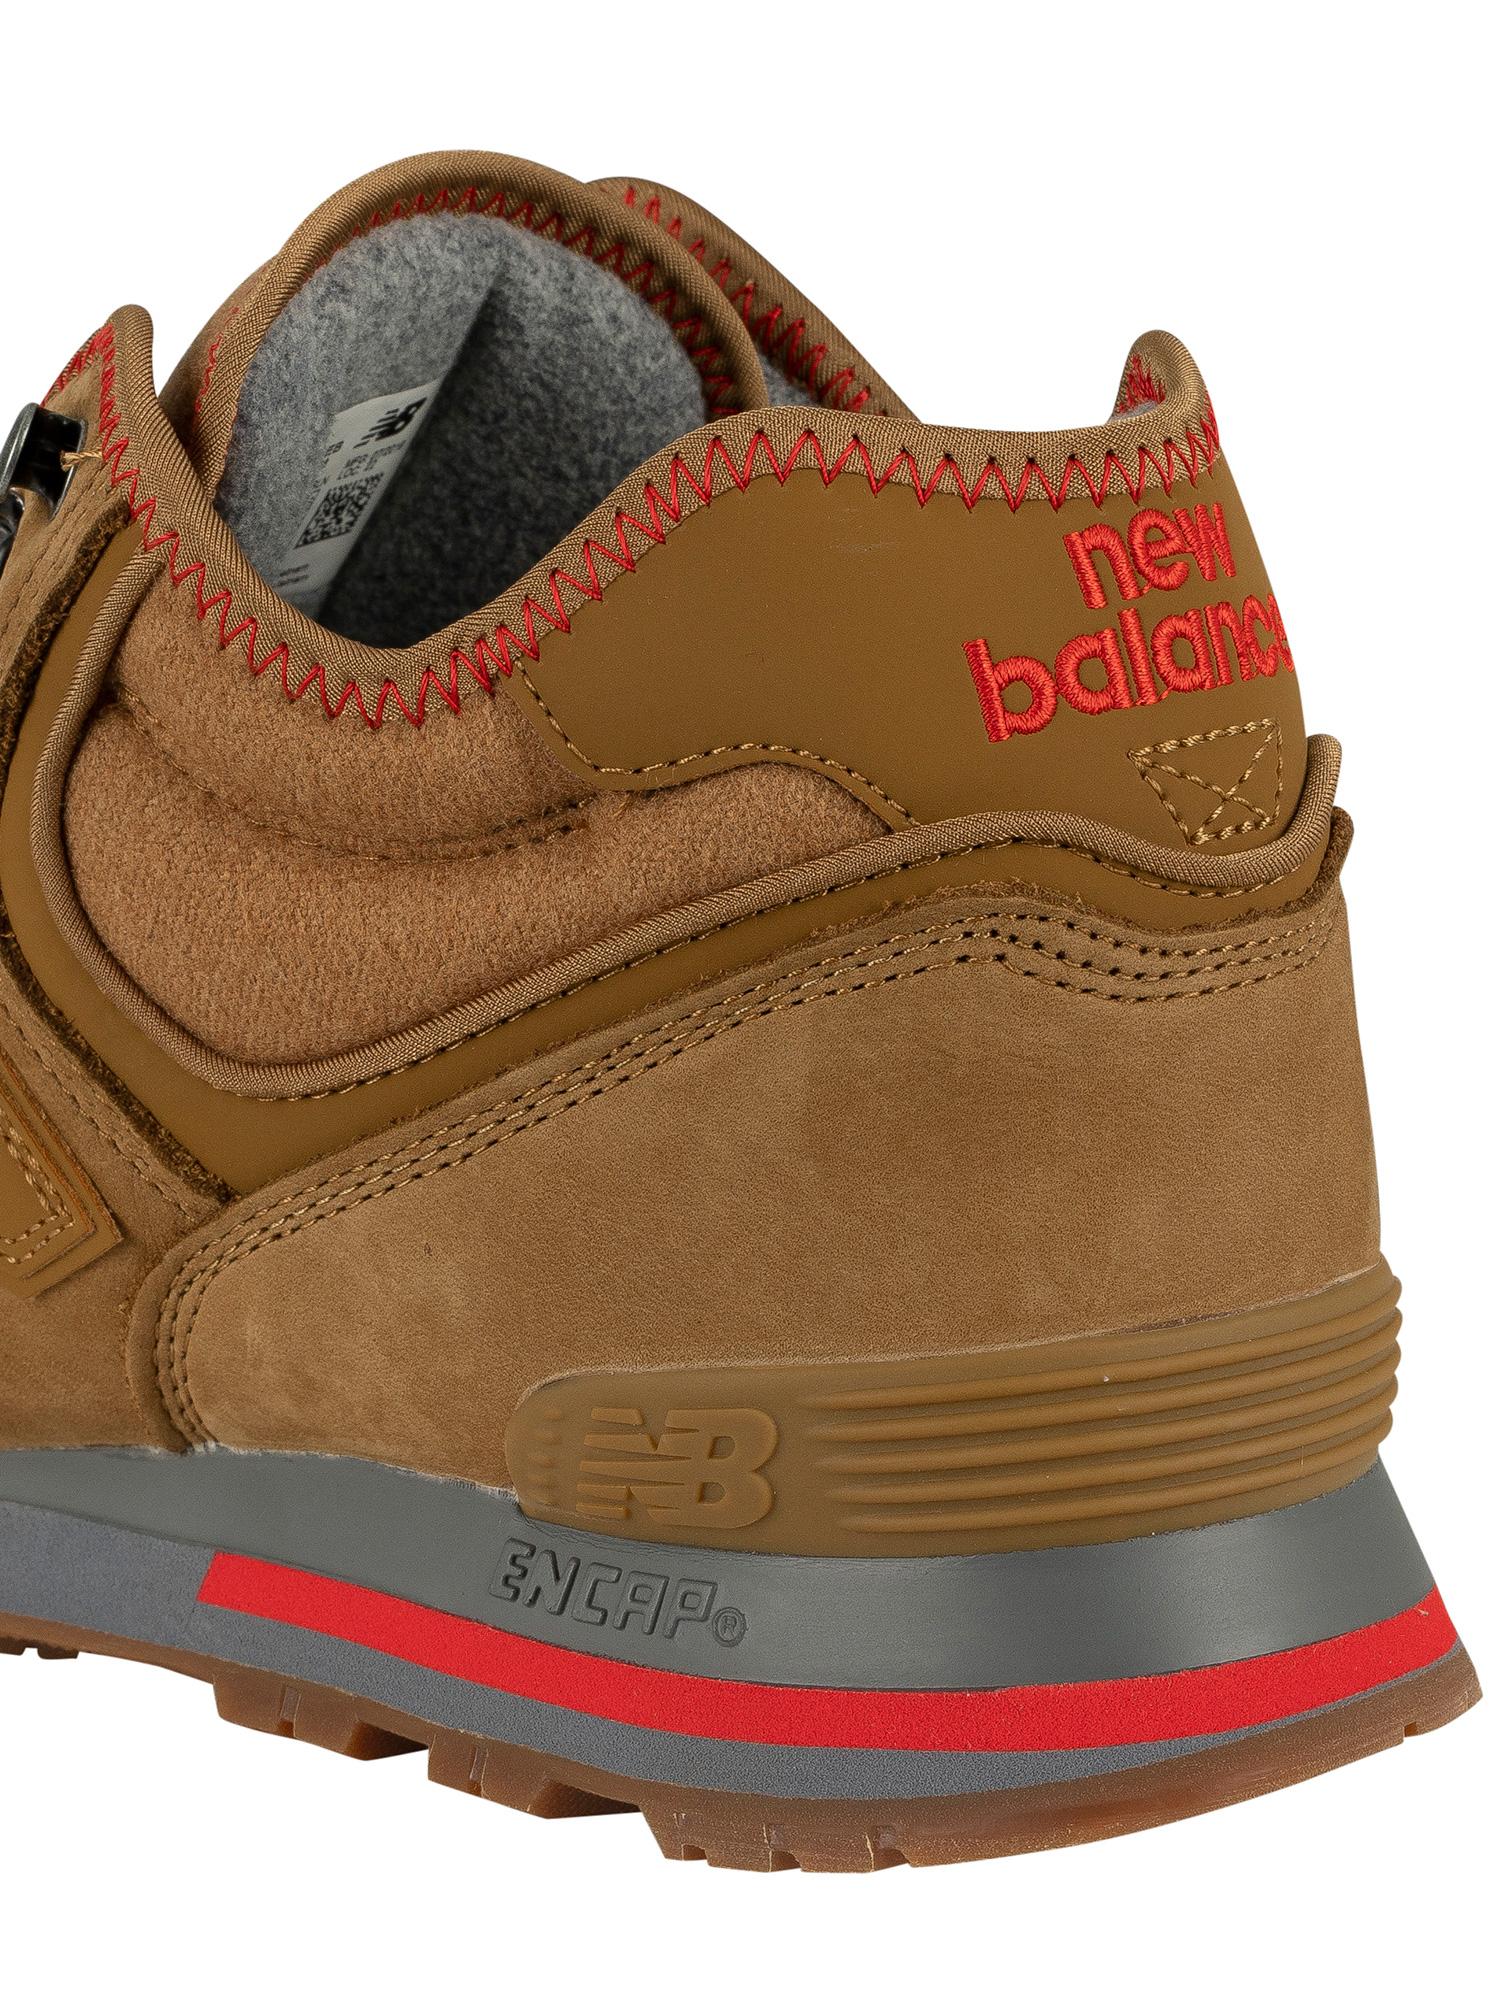 New Balance Leather 574 Mid Premium Hiker Trainers in Brown for Men - Lyst